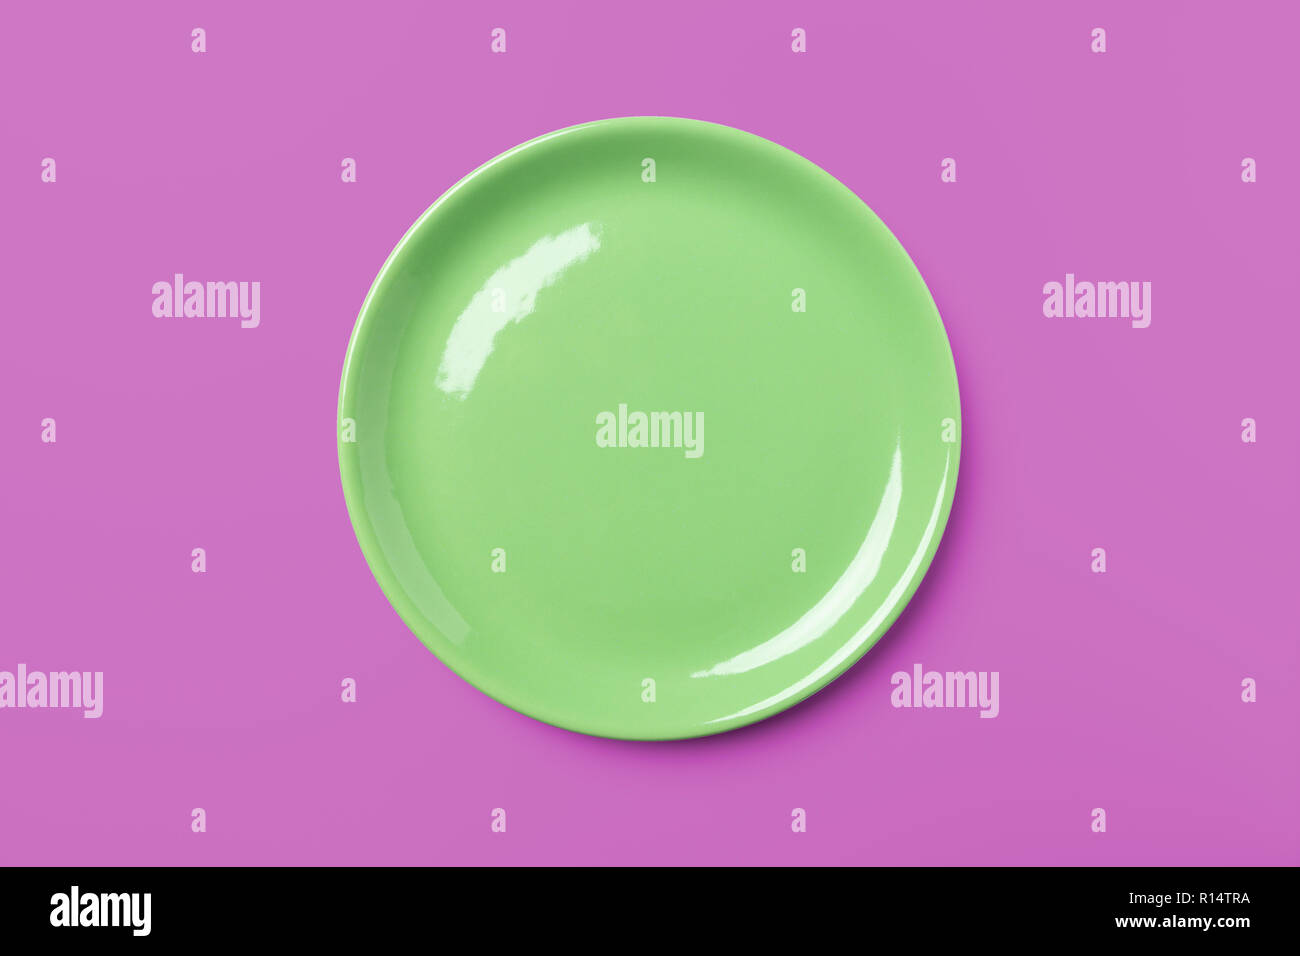 Green pastel plate on complementary pink background, pop art syle, view directly from above Stock Photo